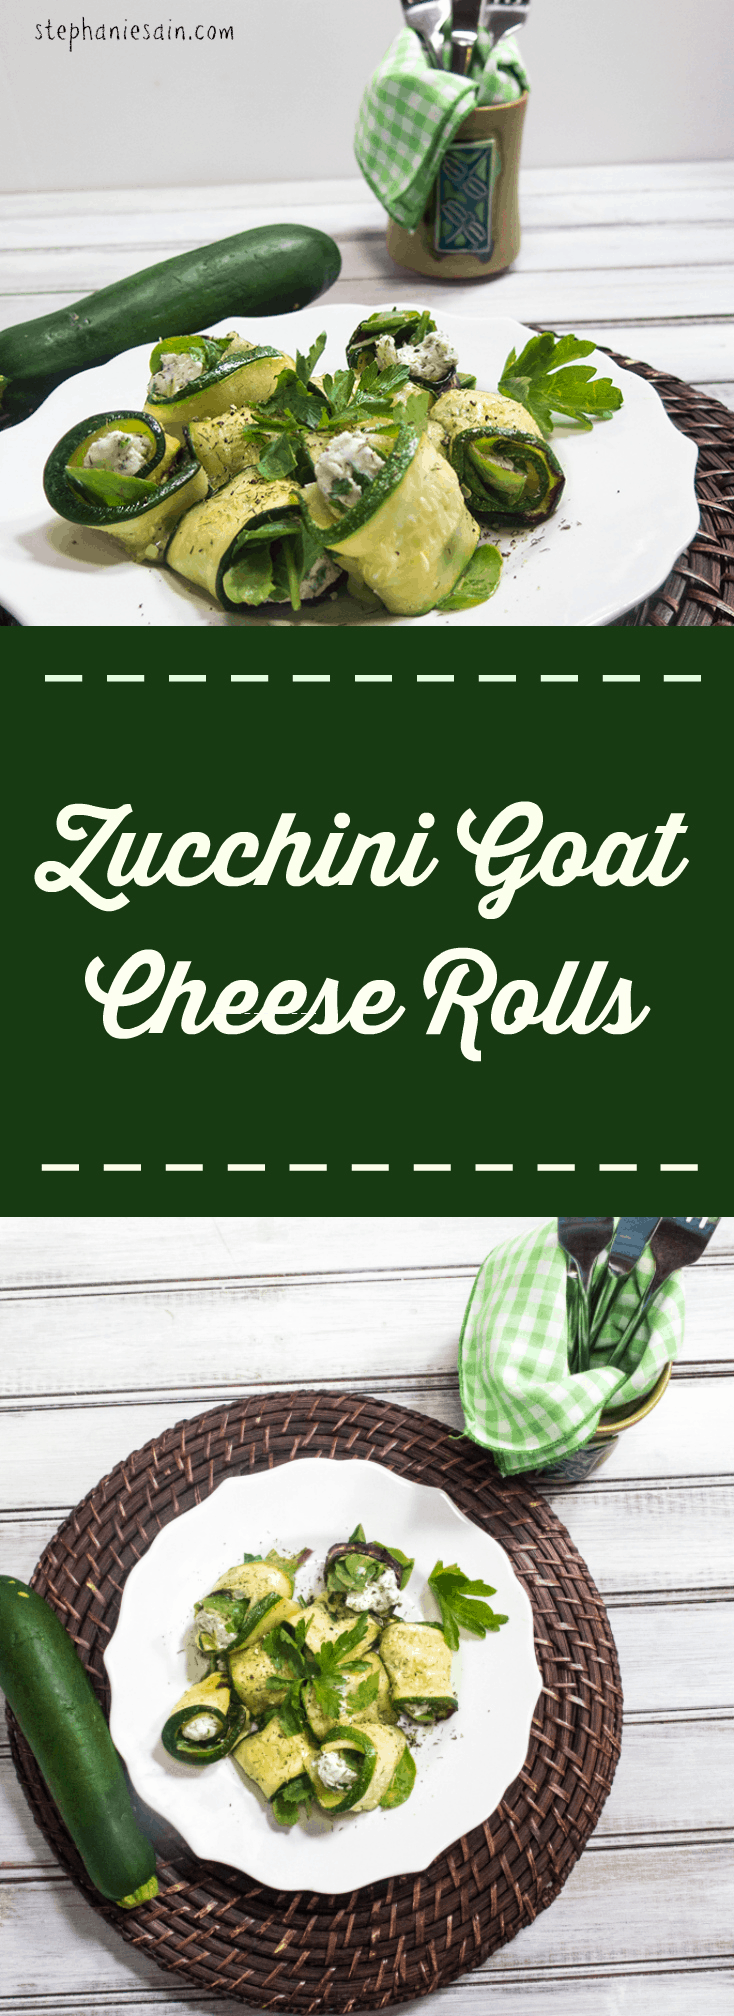 Zucchini Goat Cheese Rolls are the perfect little appetizer that are vegetarian and gluten free.